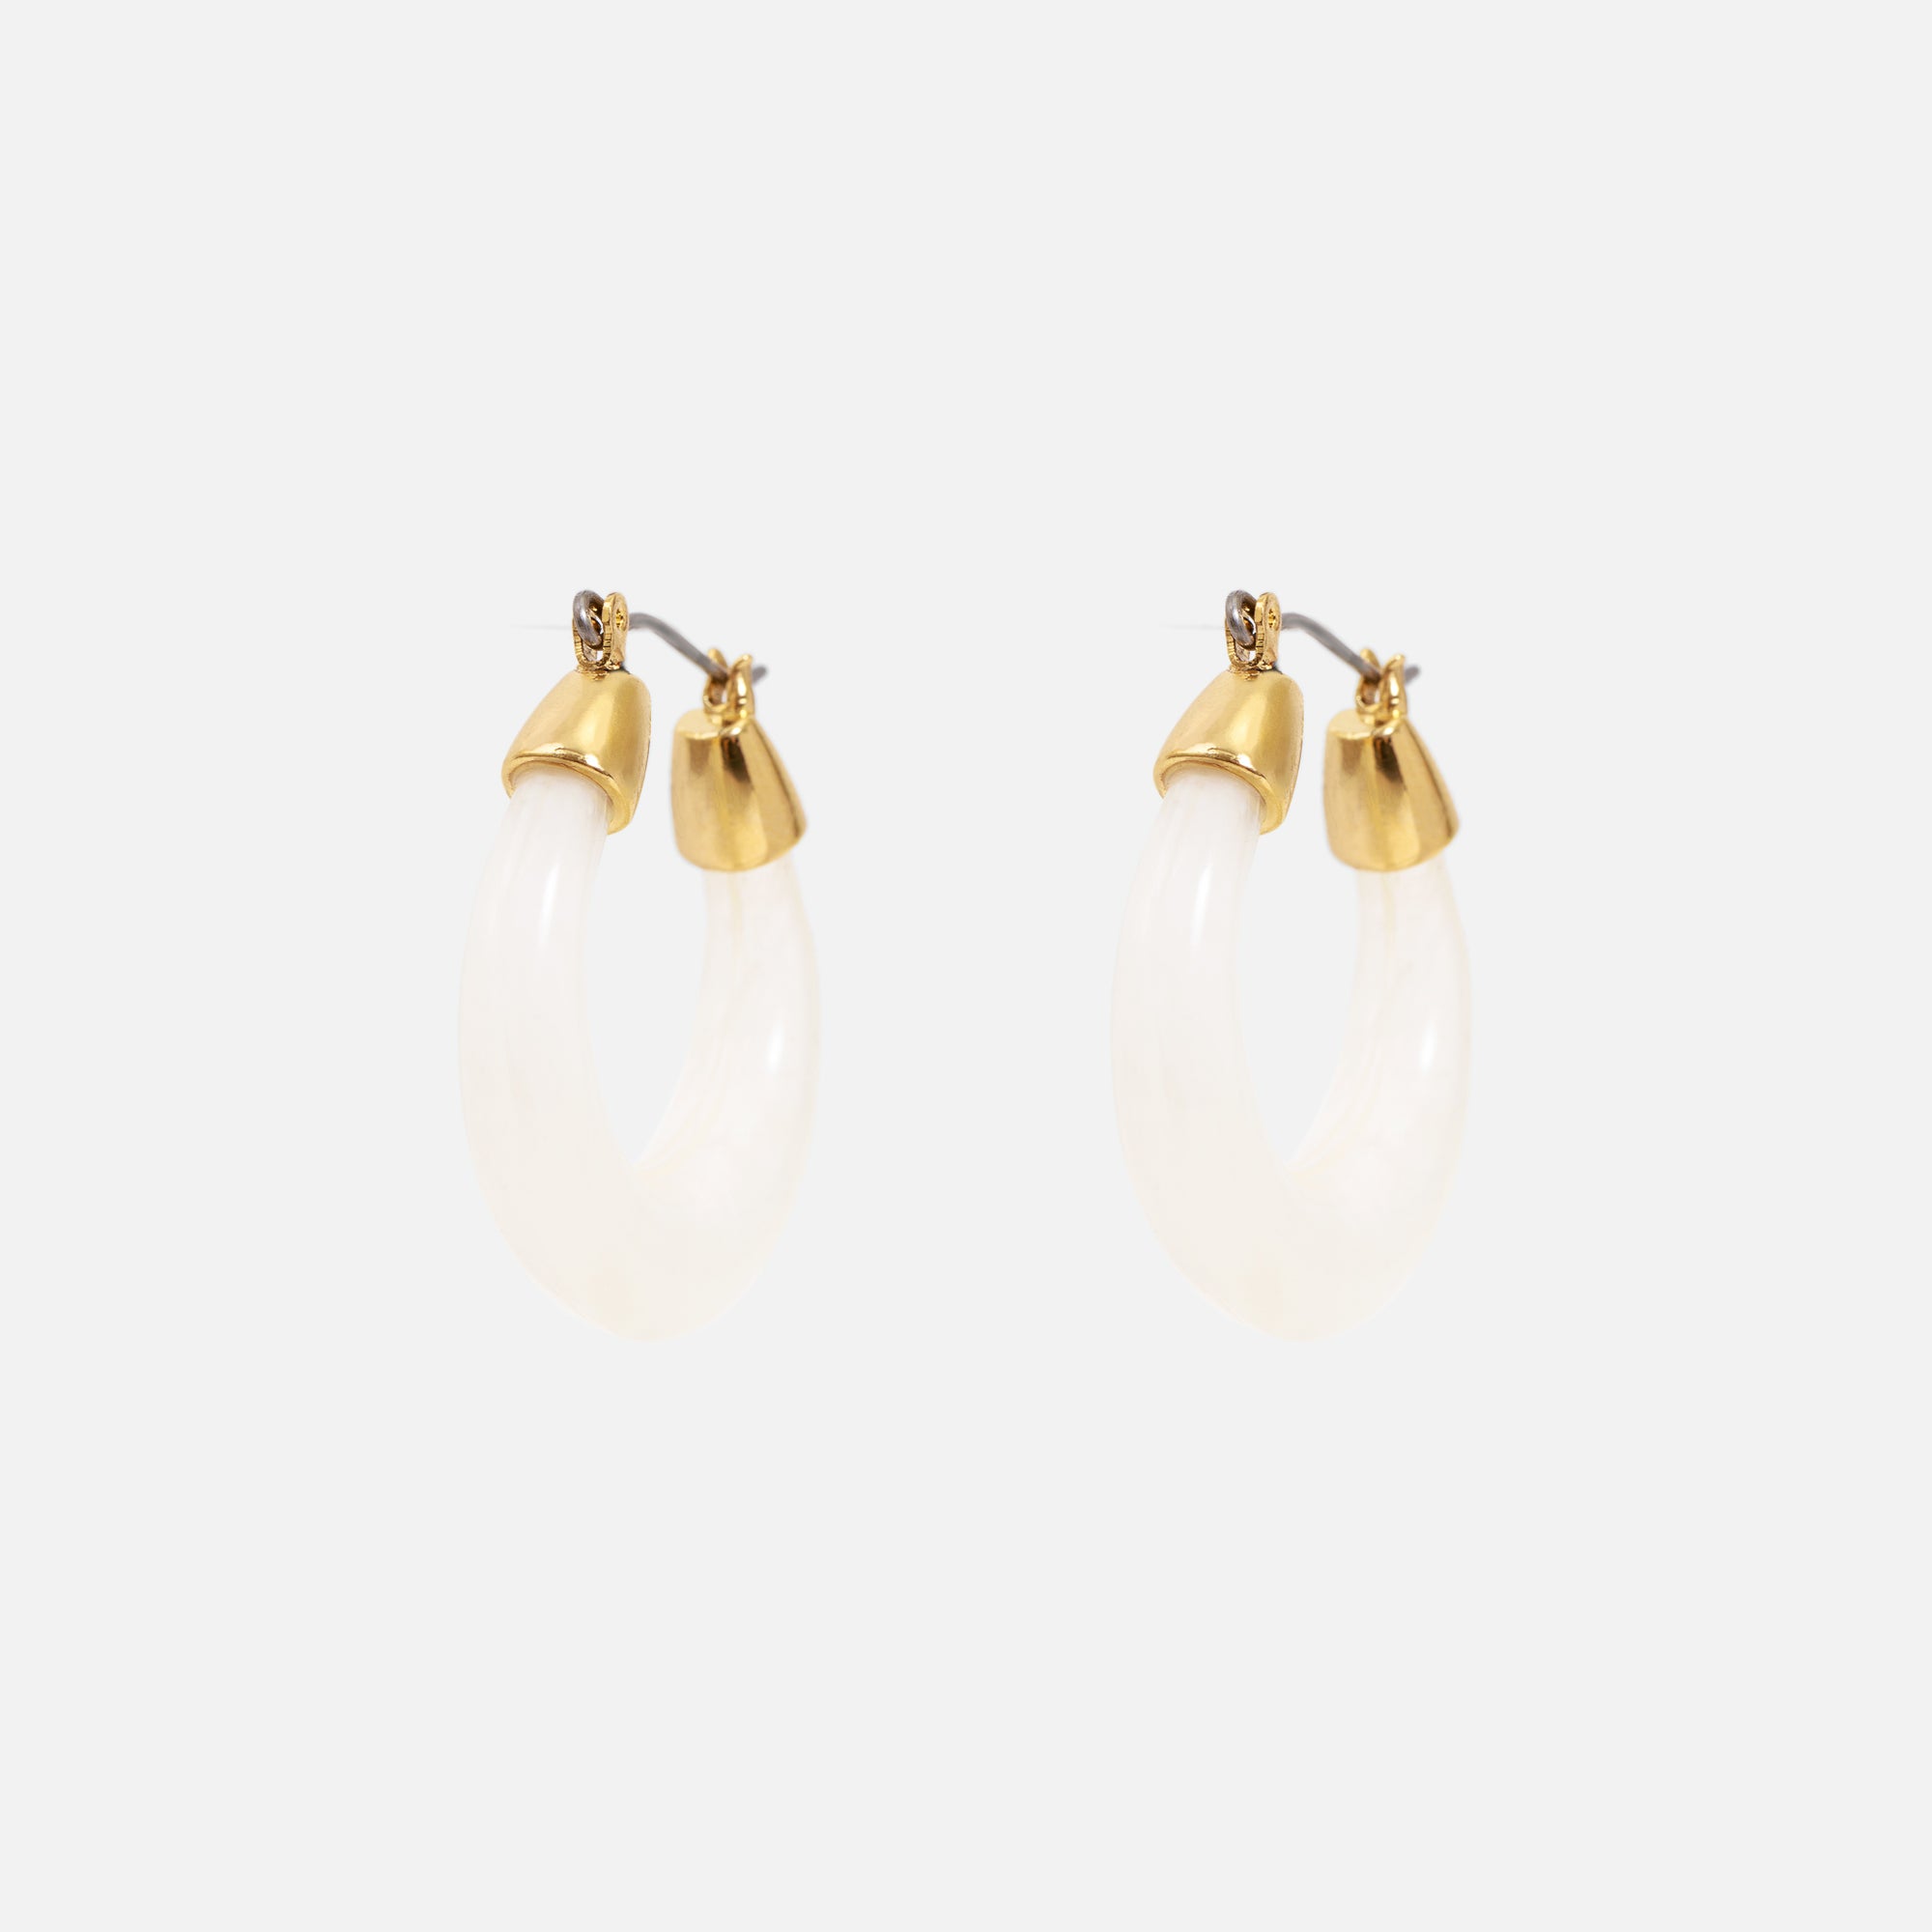 White acetate half circle hoop earrings with golden details